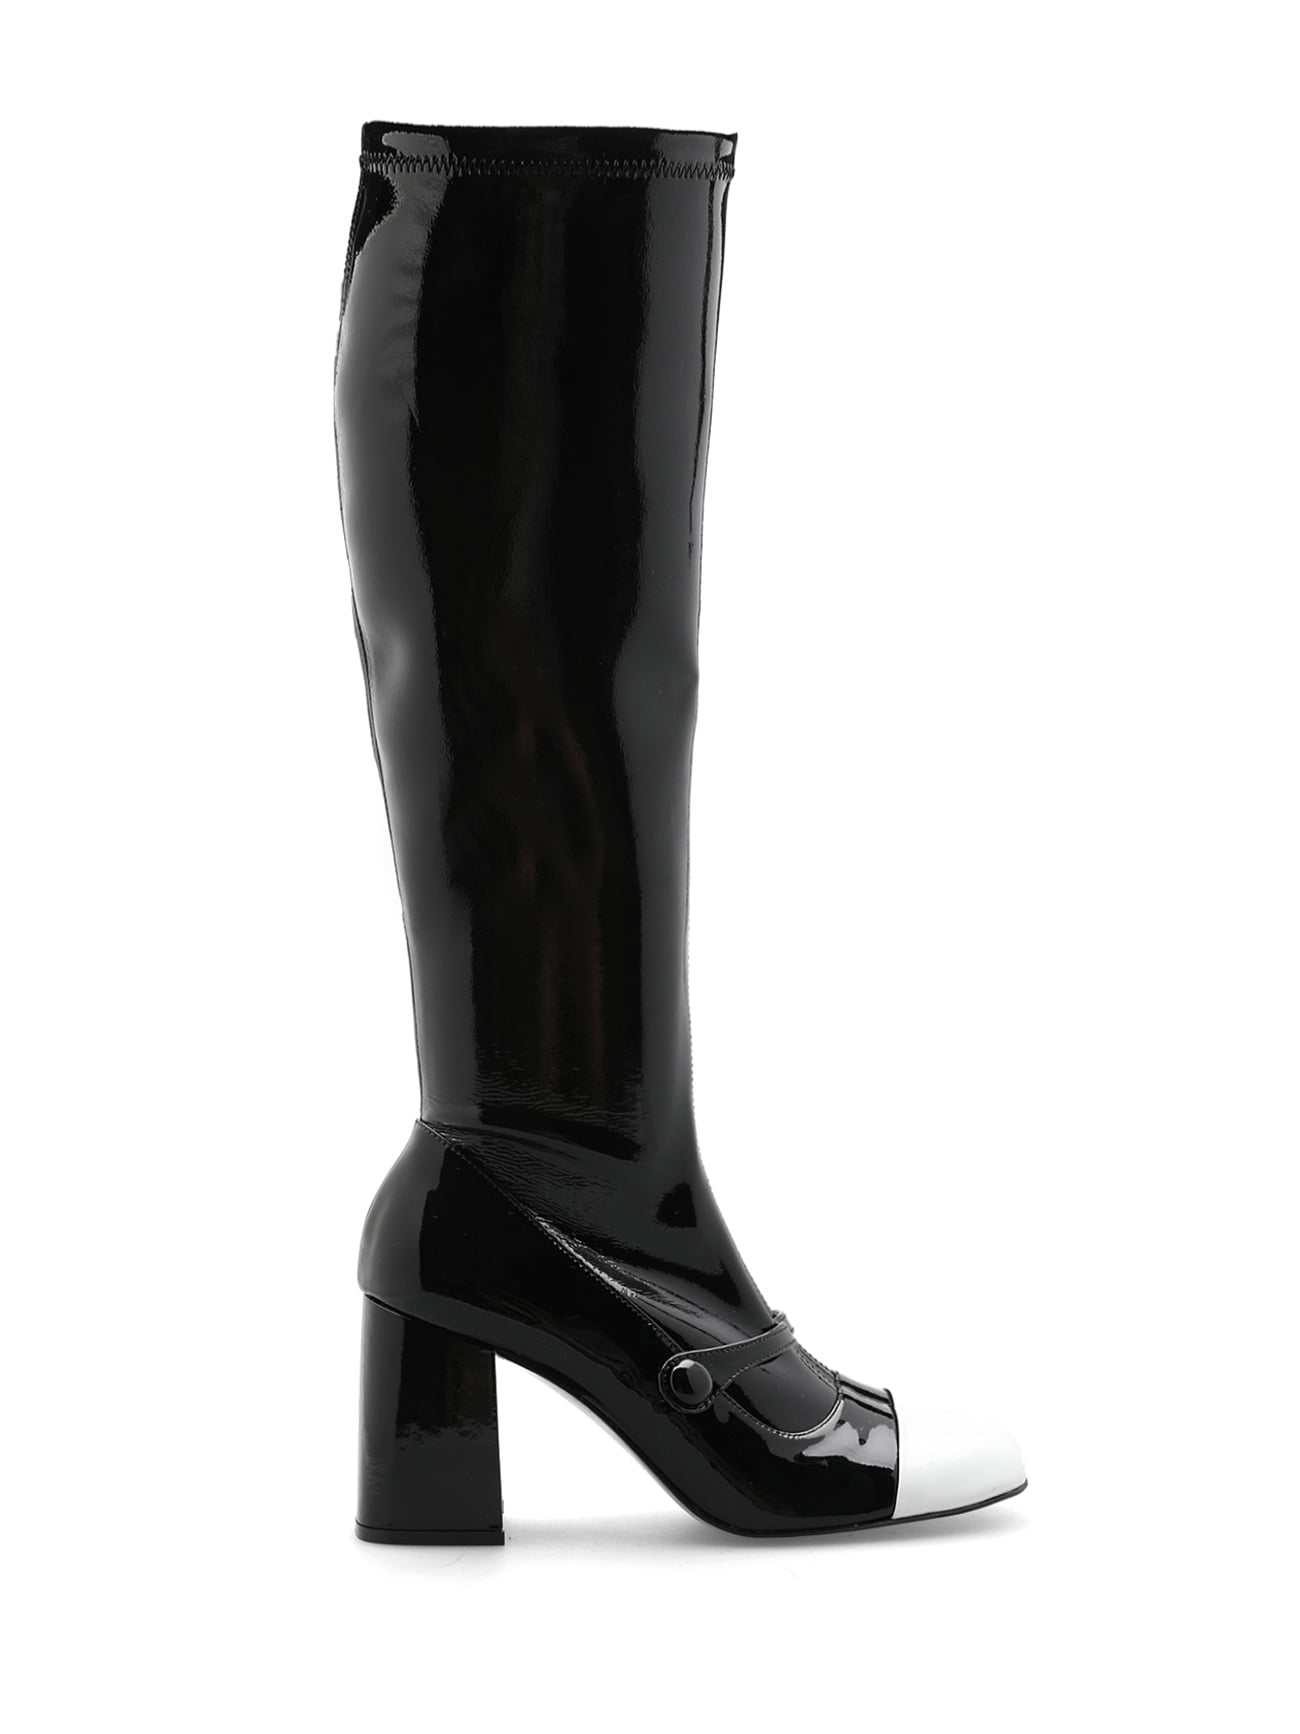 KYLIE CAP TOE LEATHER TALL BOOTS - BLACK &amp; WHITE